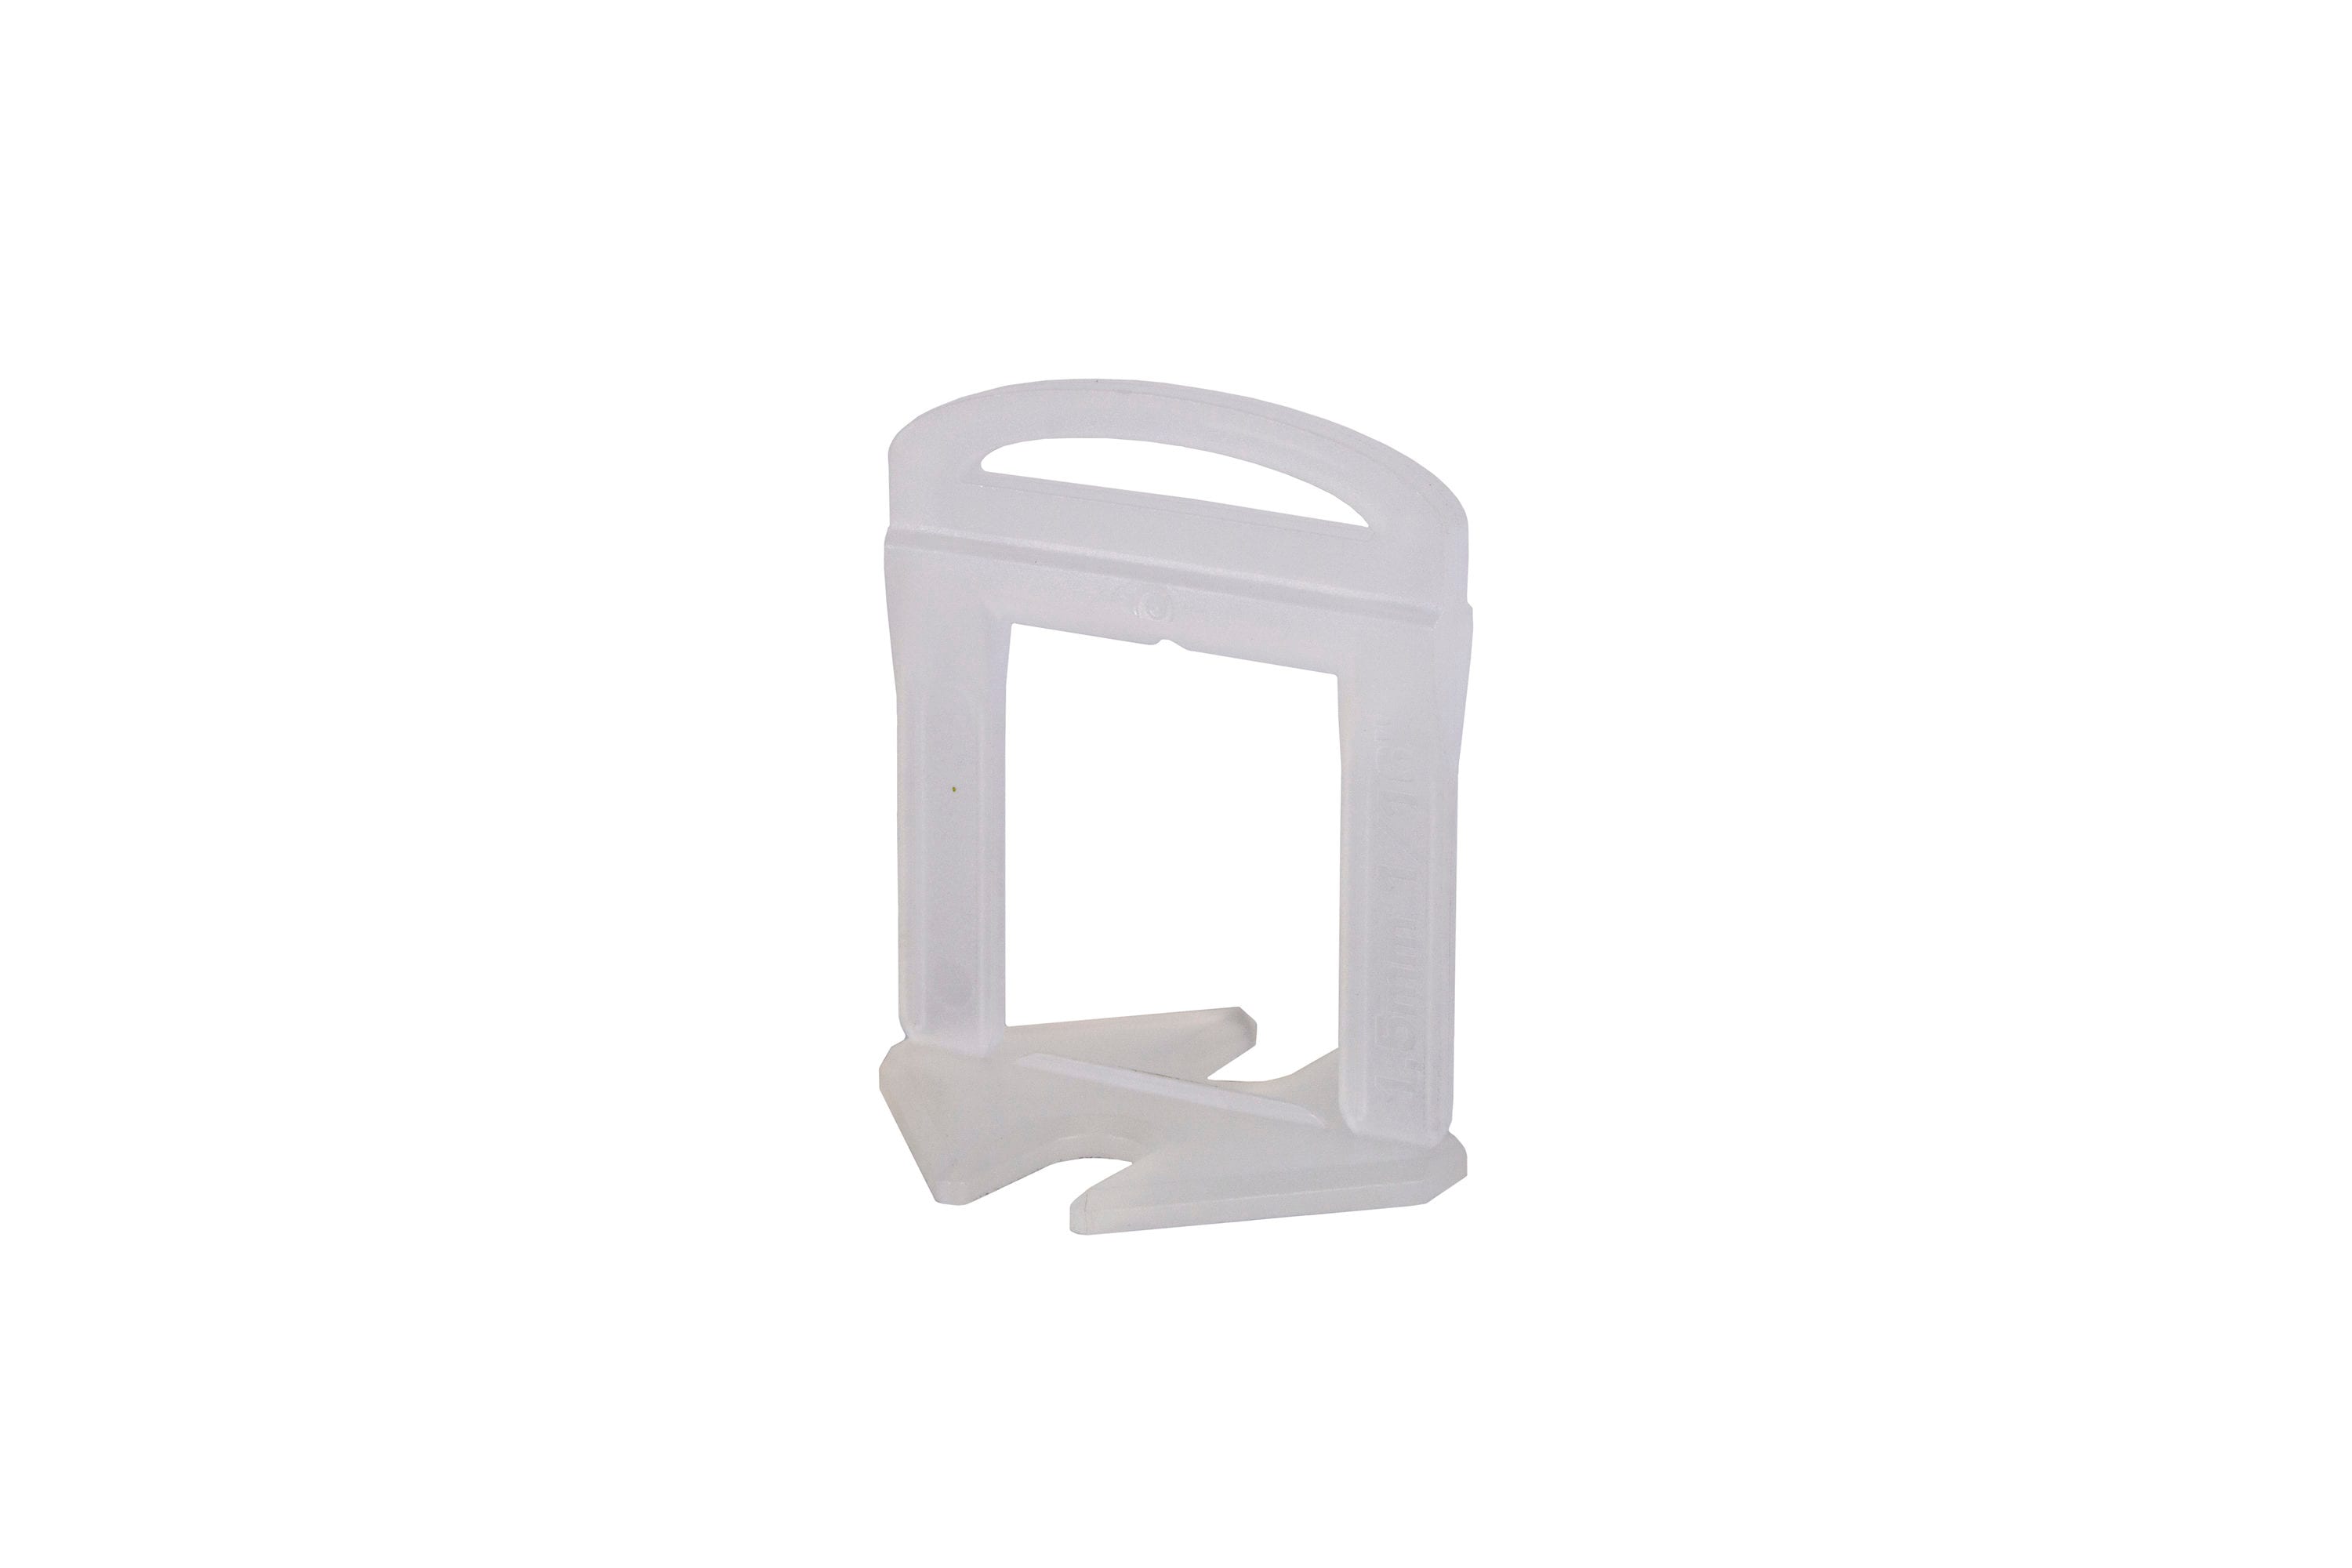 Rubi Tools White Plastic Tile Spacers 1/16-in (0.0625-in) - Ideal for ...